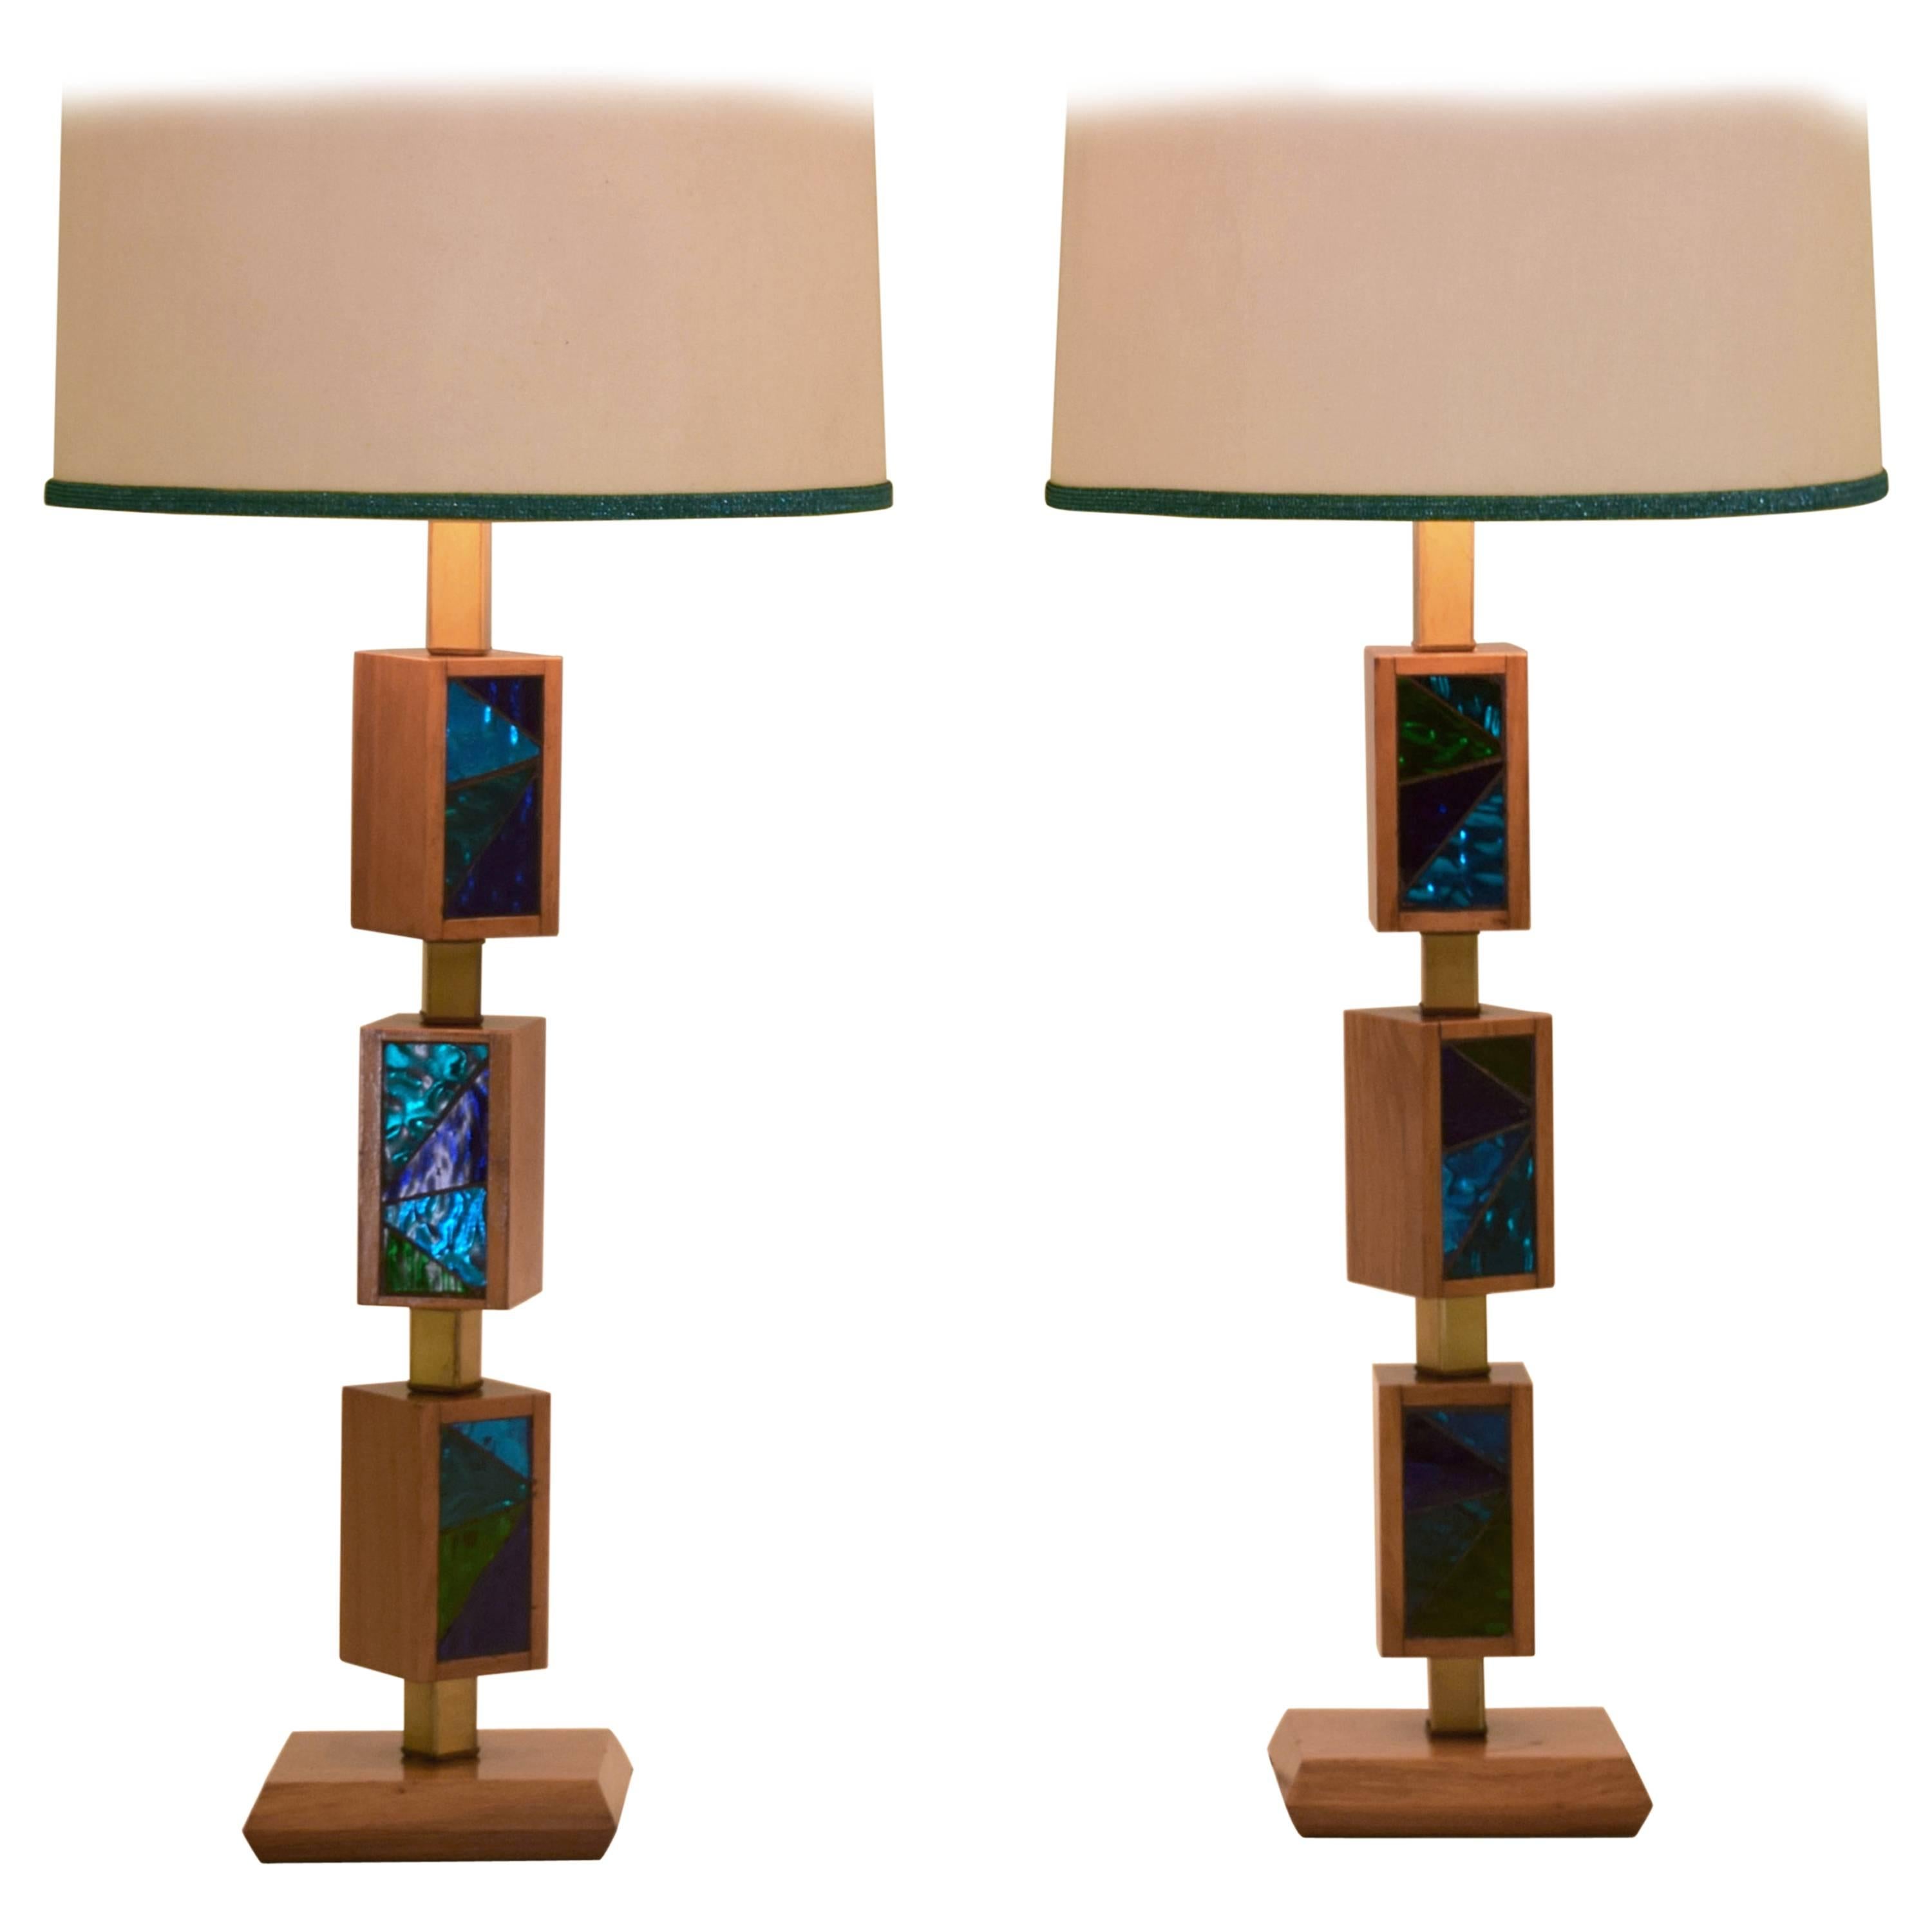 Vintage Cubist Mosaic Glass Positionable Table Lamp, Pair by Georges Briard